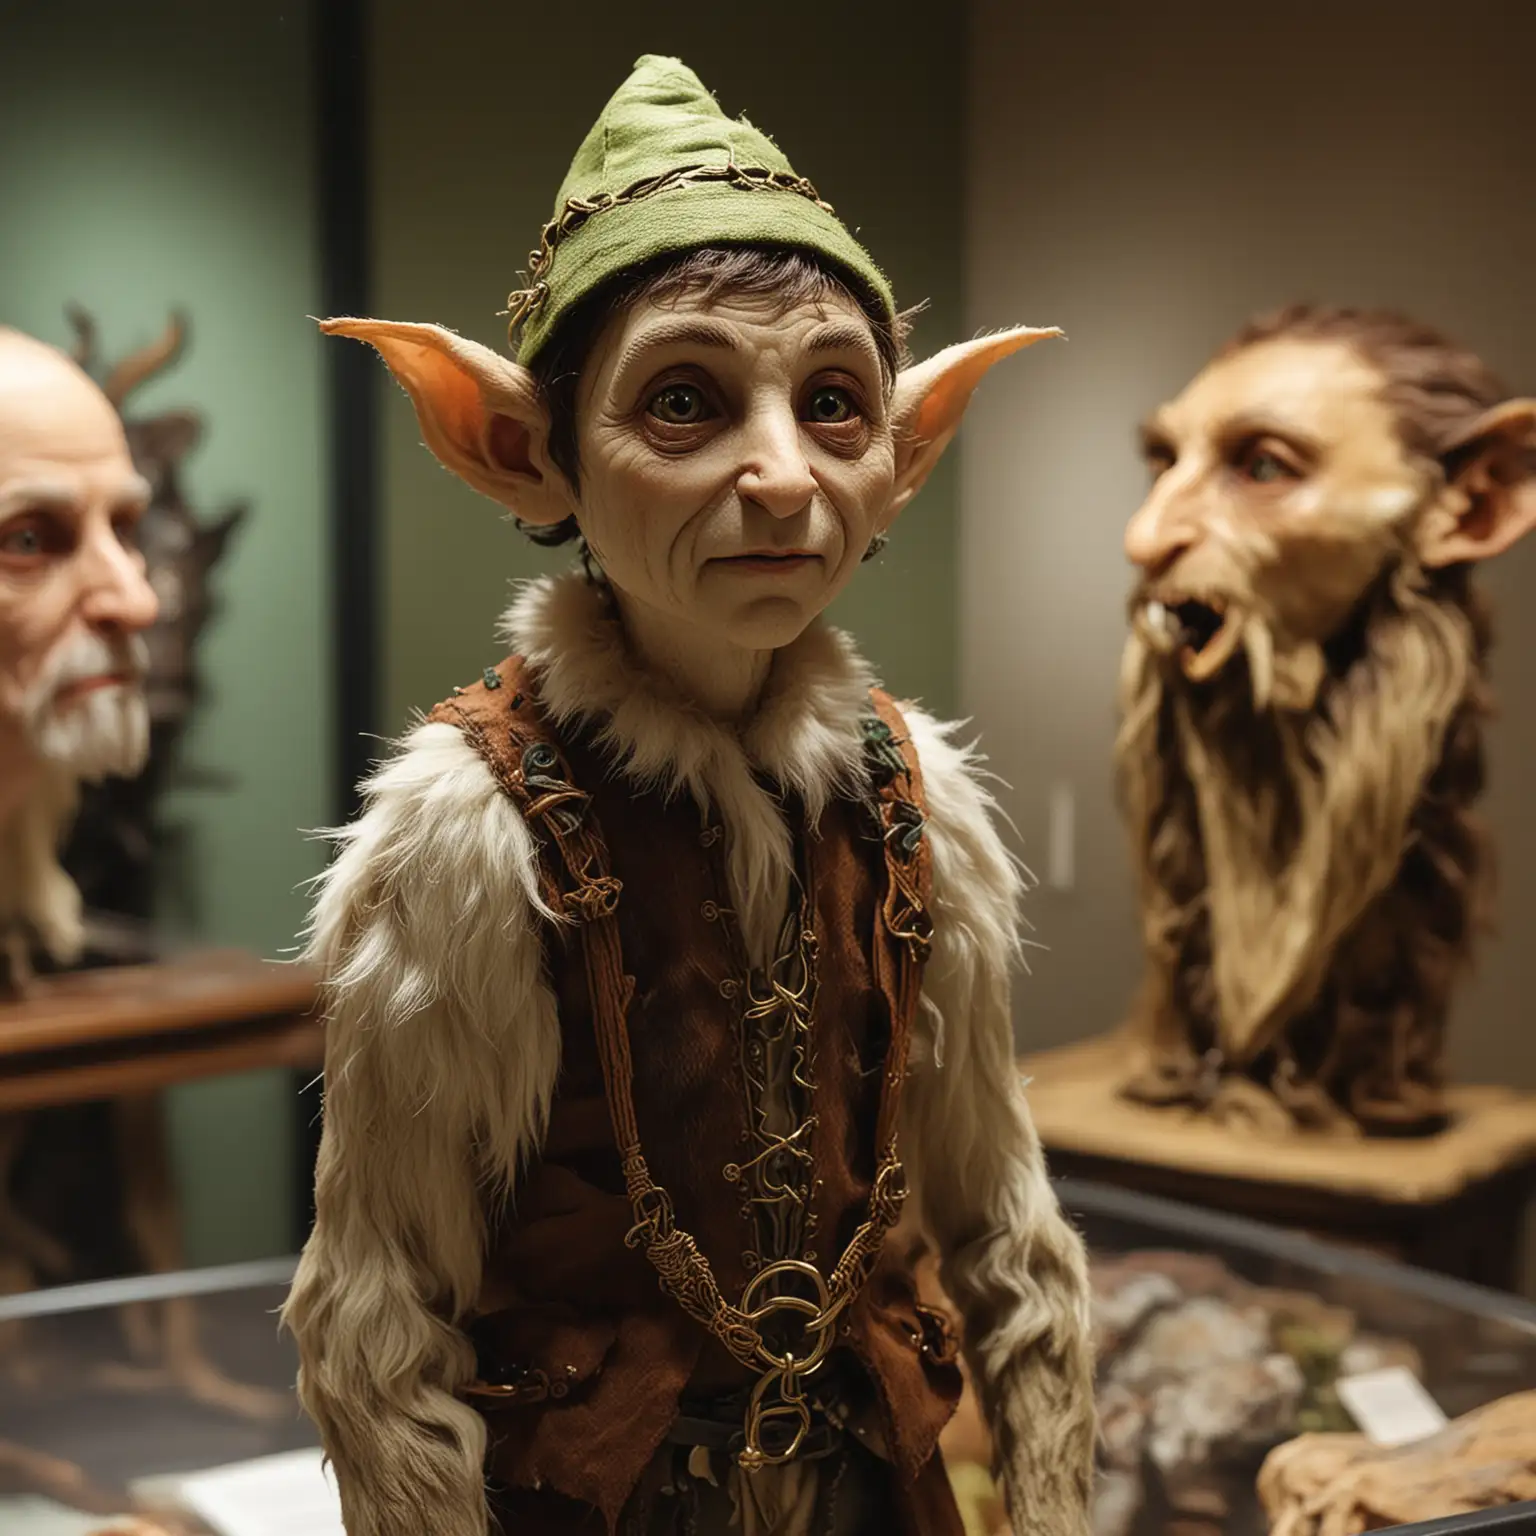 Taxidermied Elf Display at Museum of Mythical Creatures